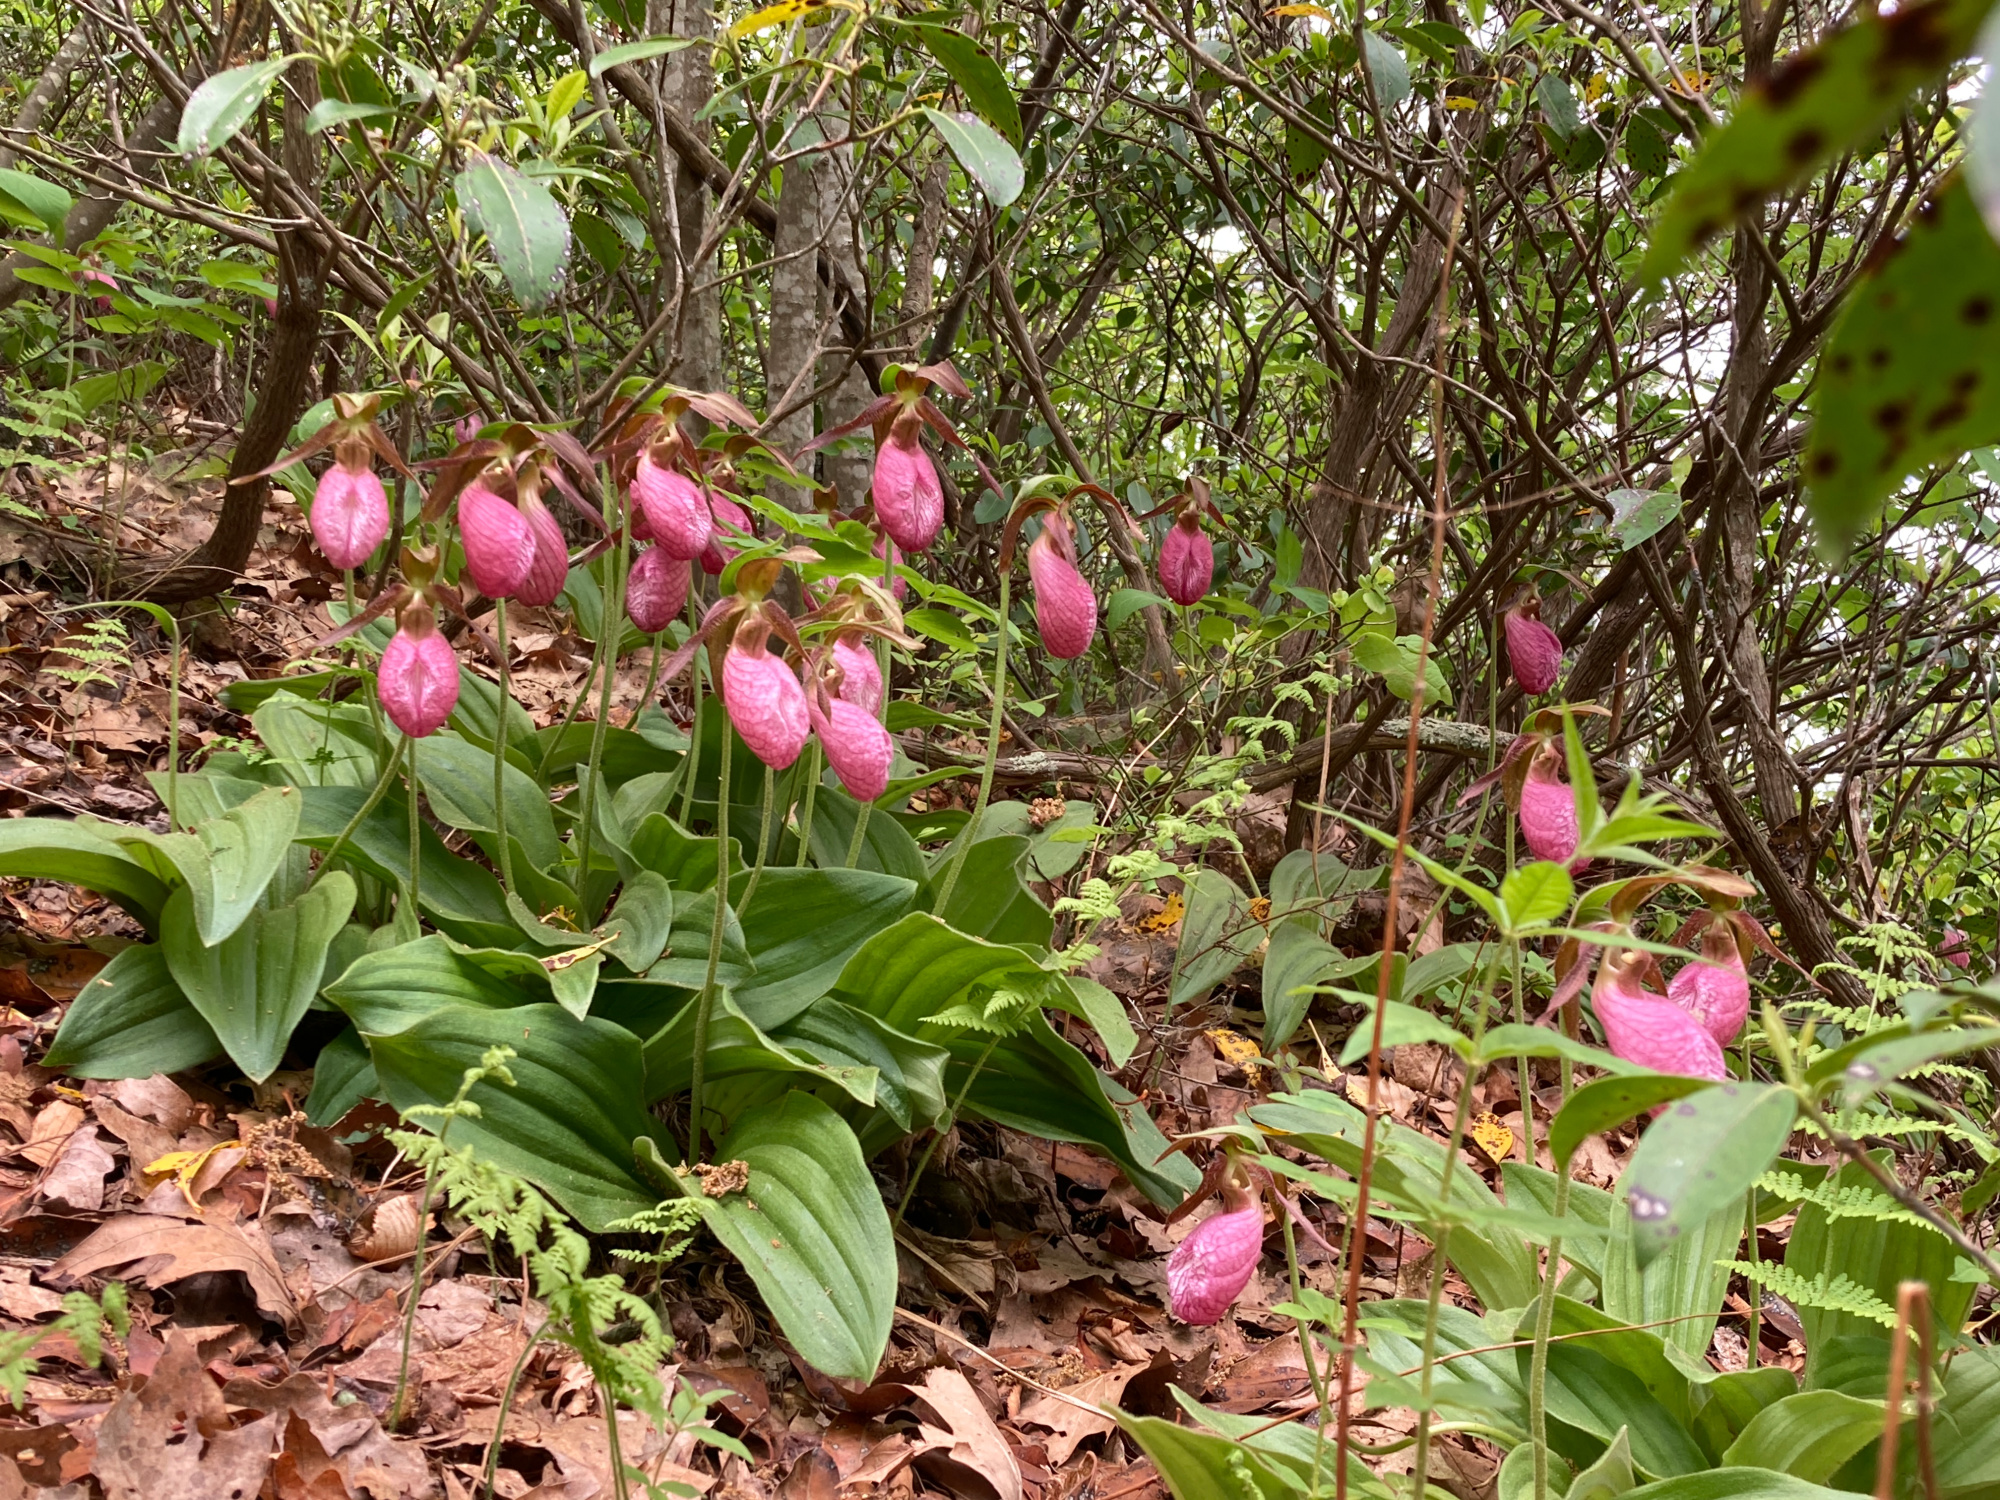 A group of Pink Ladys Slipper wildflowers along a trail. The plants have two opposite basal leaves with conspicuous parallel veins and a large flower at the end of an erect stalk. The flowers are a deep magenta pink.